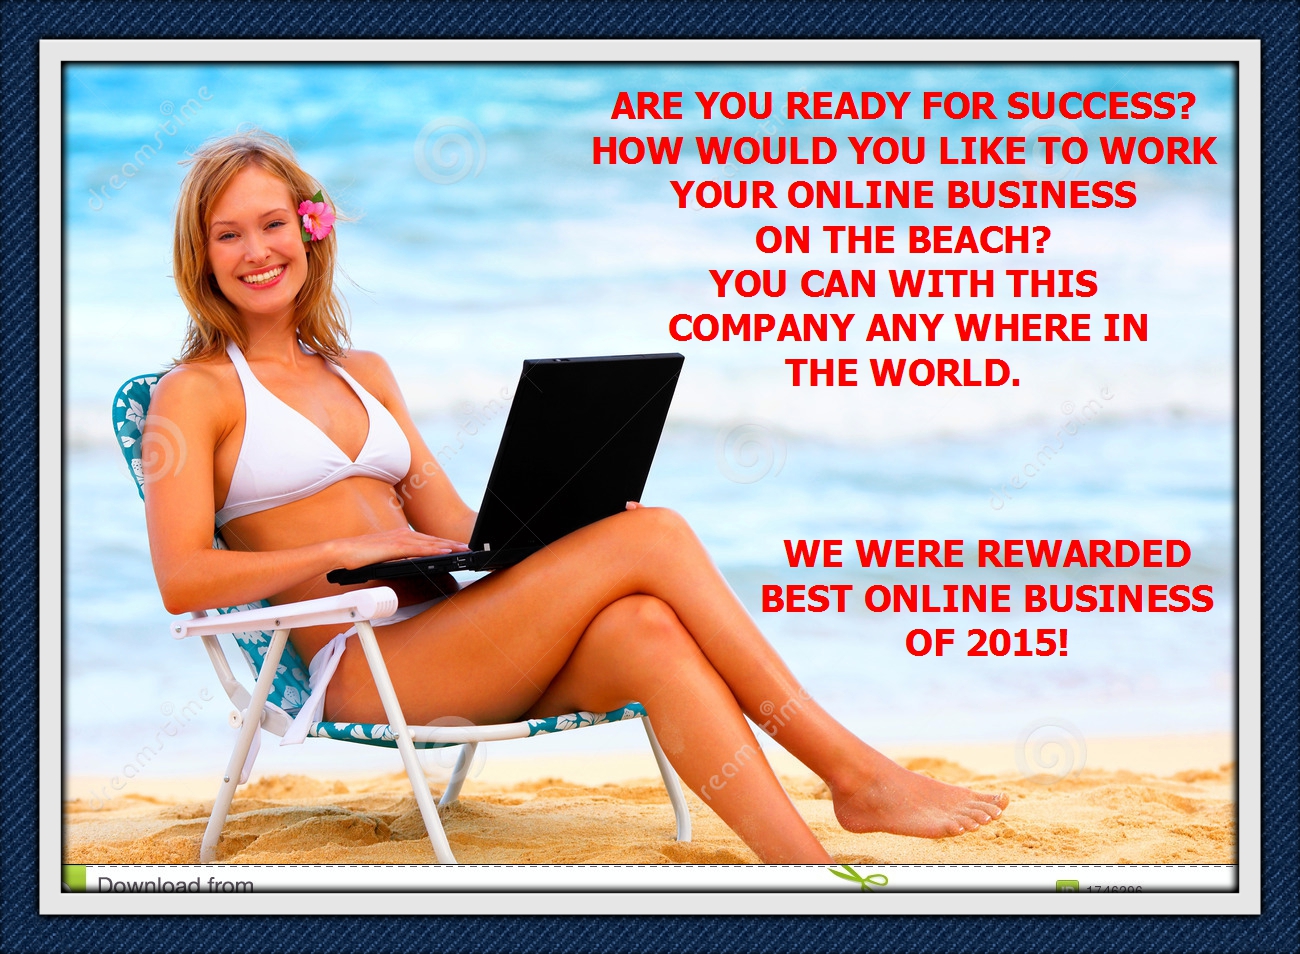 Work On The Beach...And Make Money Getting A Tan or Enjoying the Beach and Walking. It is your Dream...